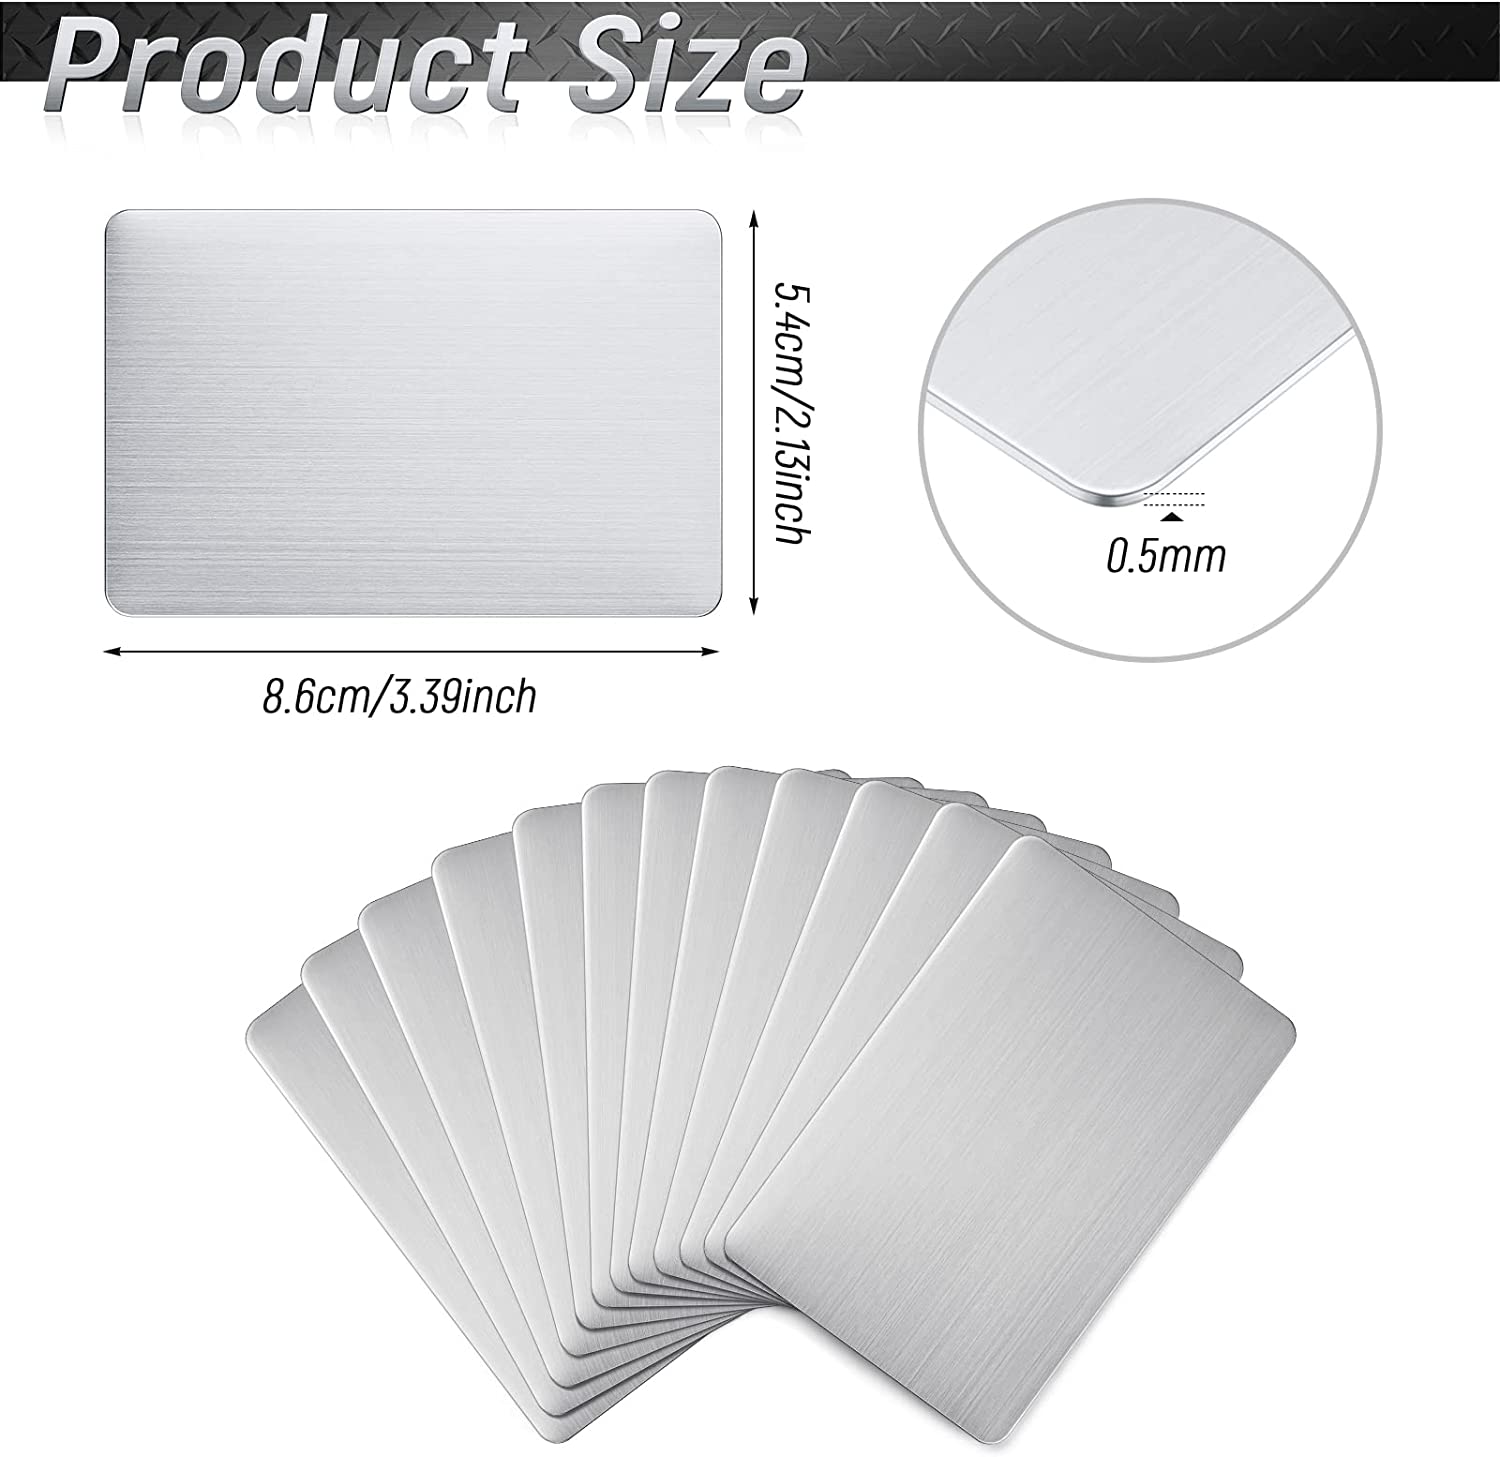 Wholesale Blank Plates For Engraving